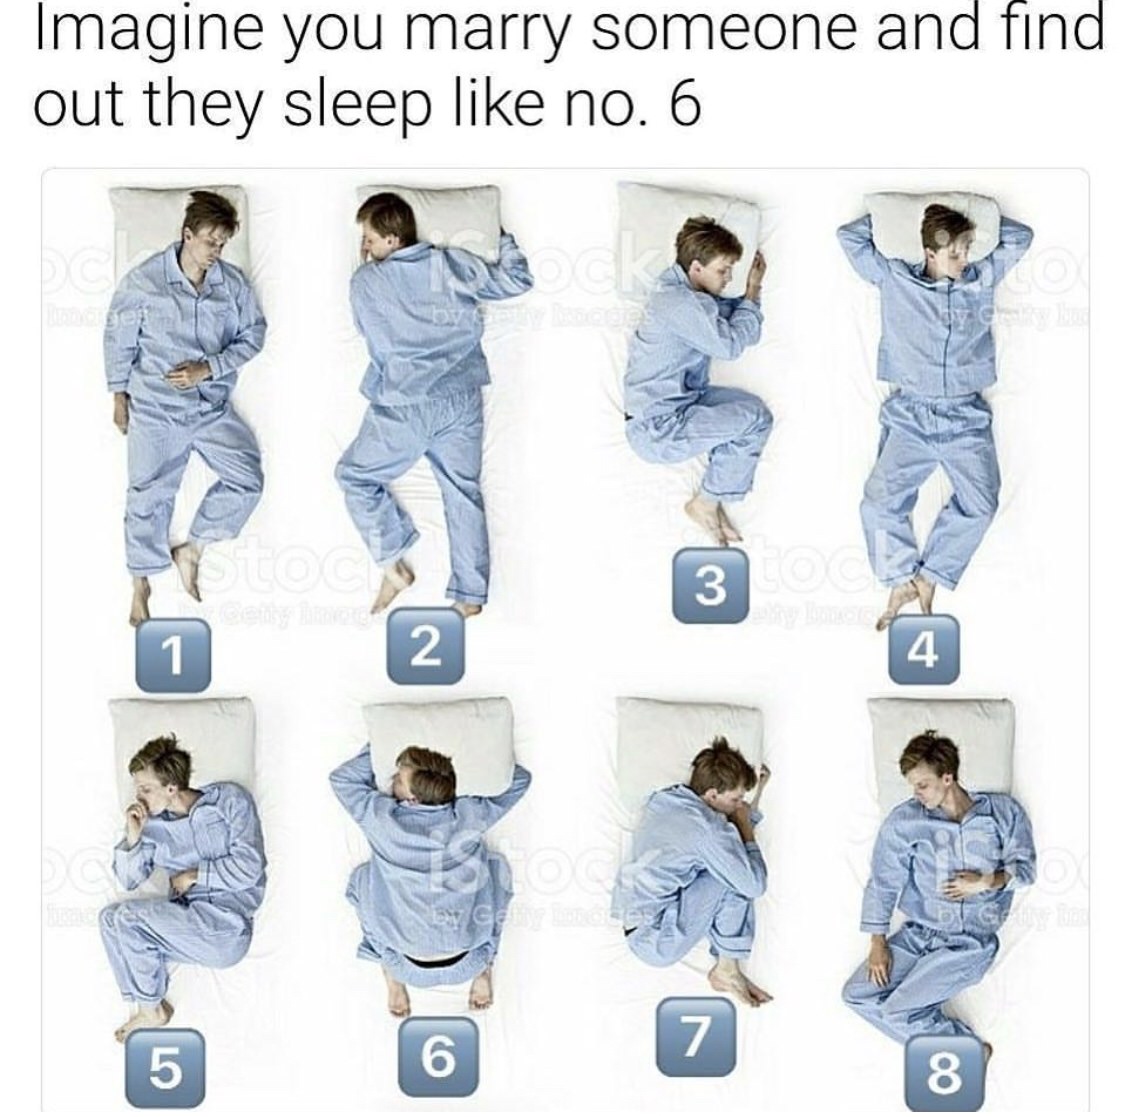 Meme about finding someone who sleeps like a frog